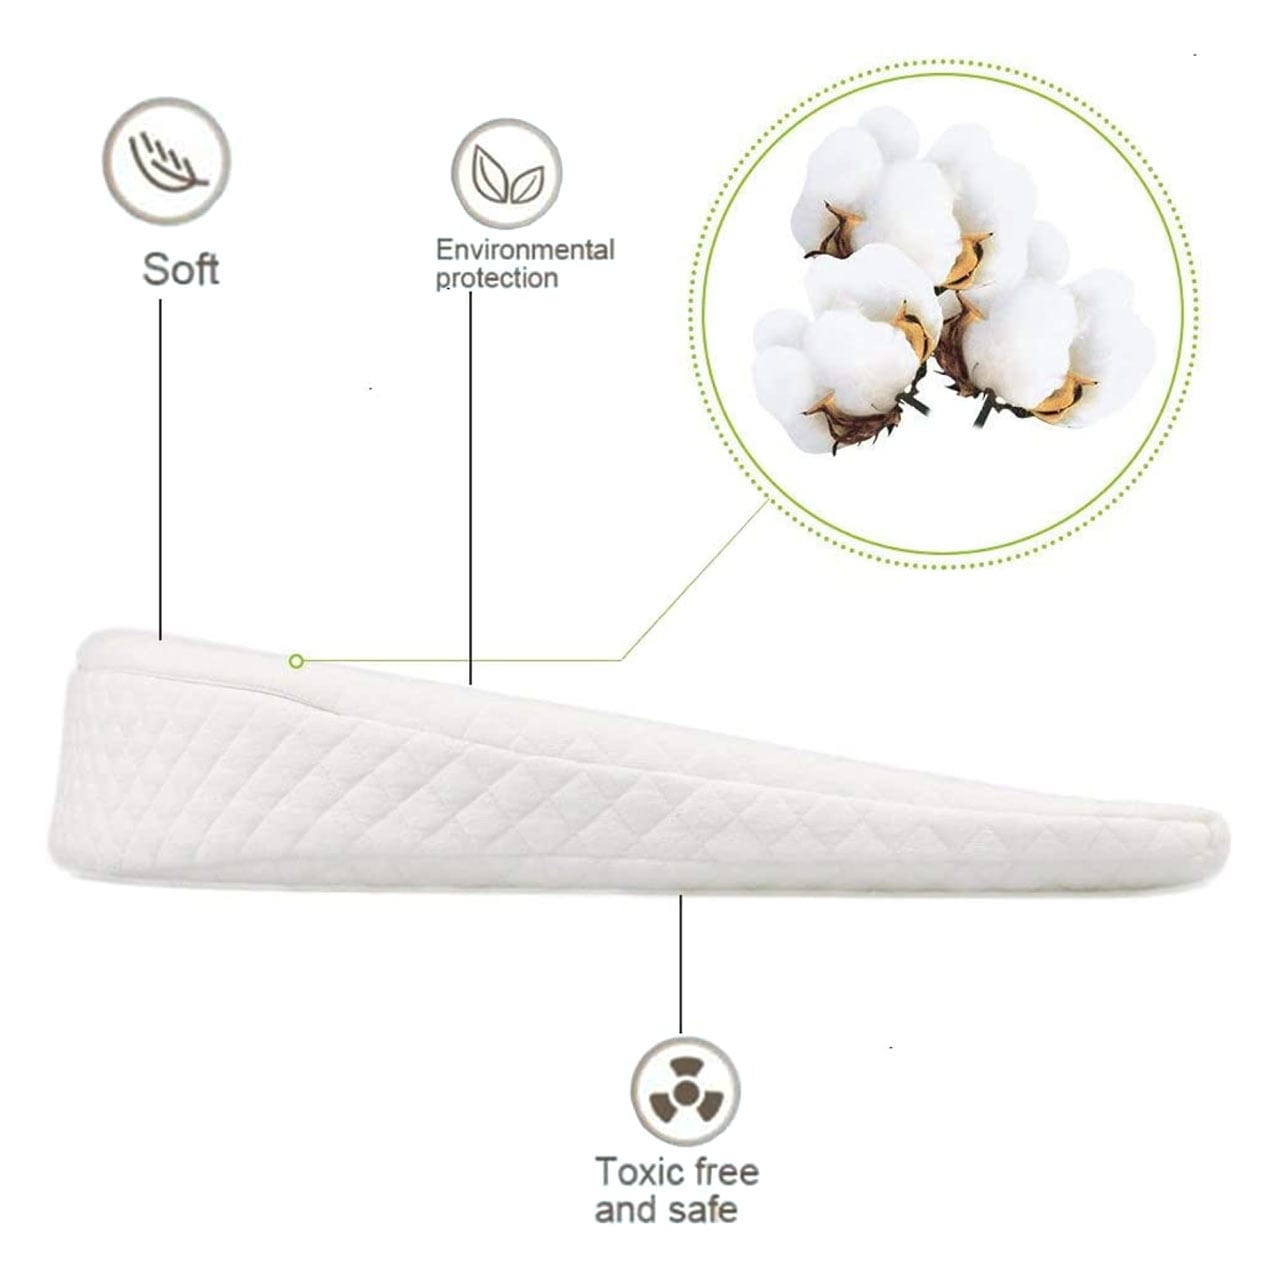 Cotton Home Smooth Wedge Memory Foam Pillow Anti-stress Fabric White